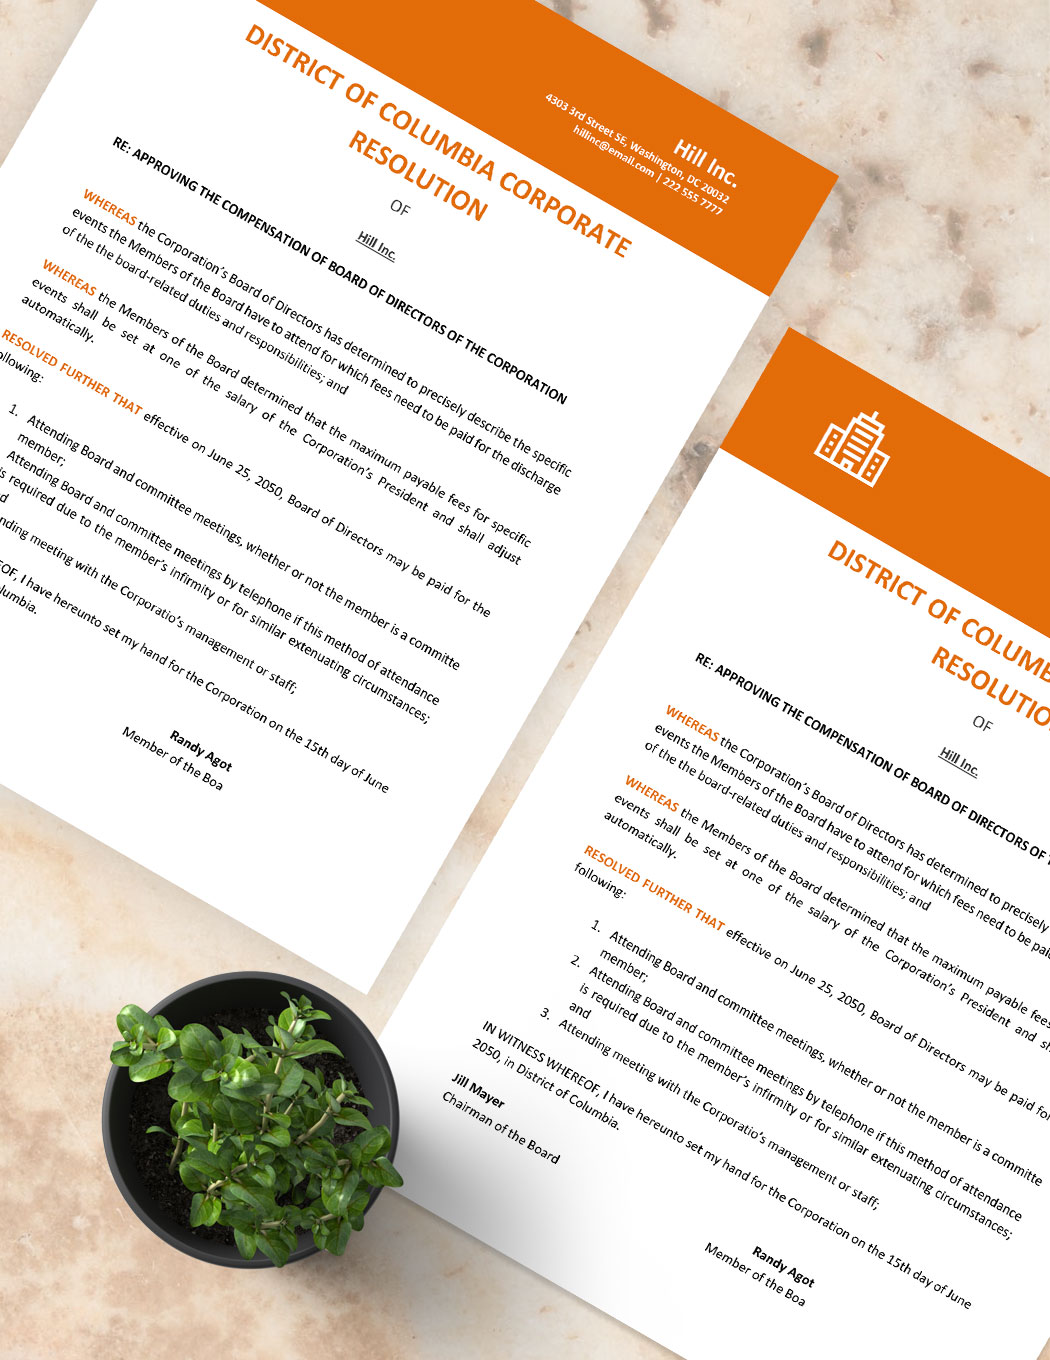 District Of Columbia Corporate Resolution Template